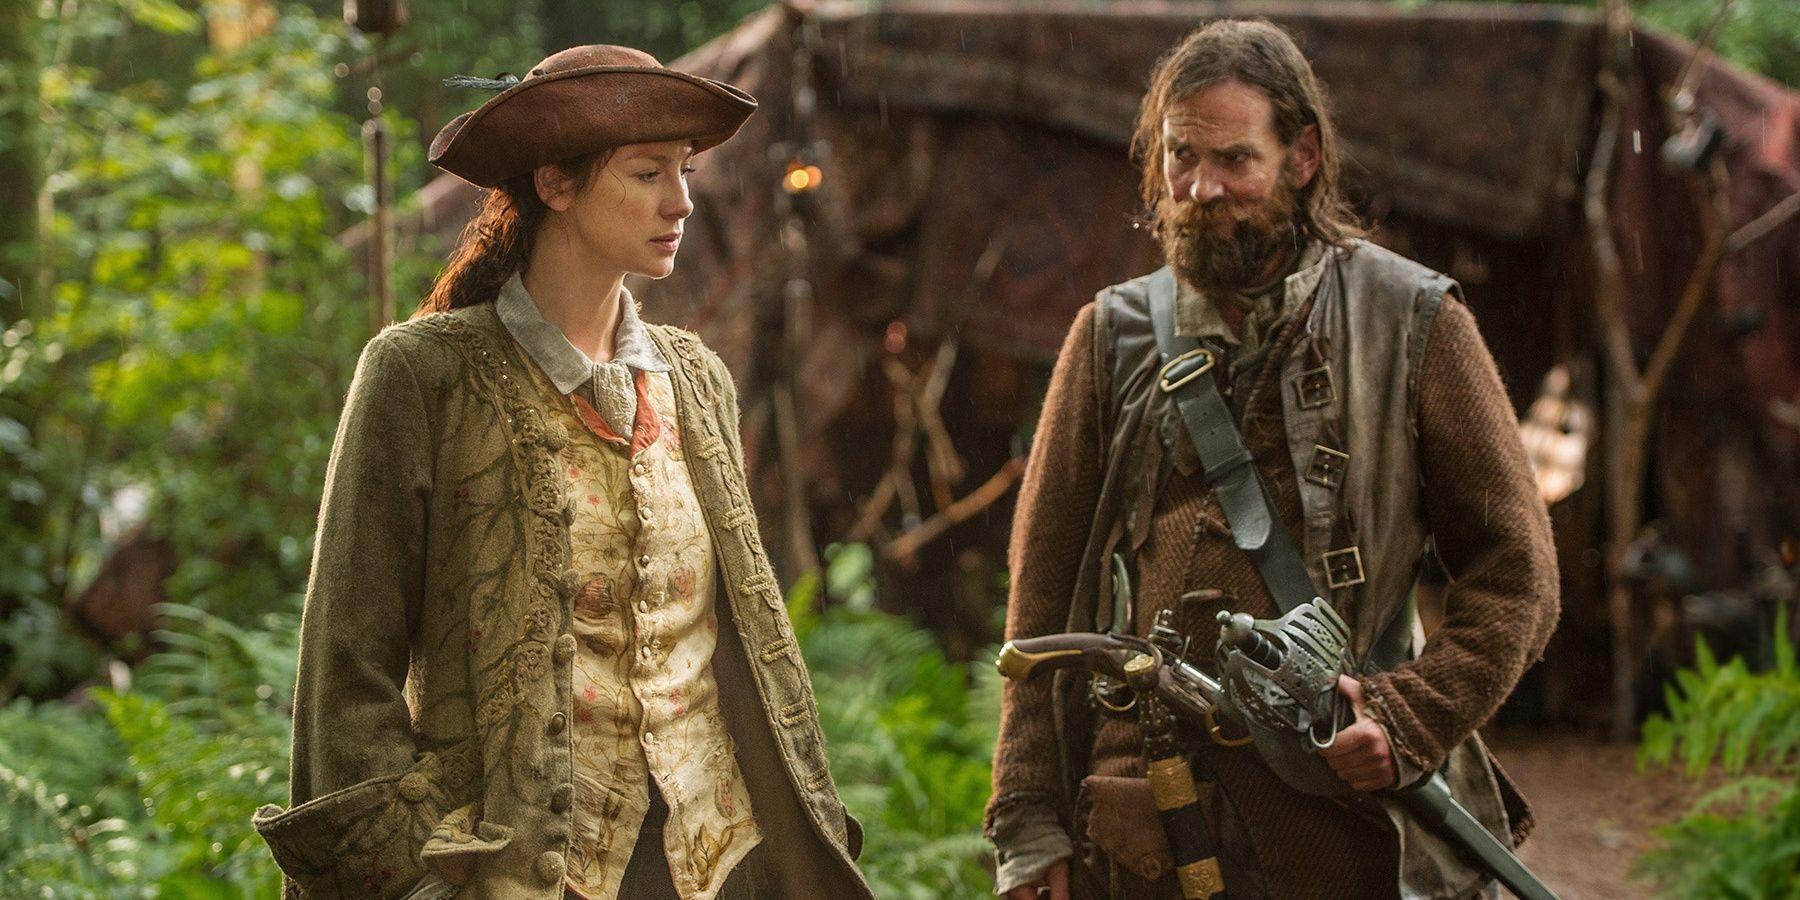 Outlander: 10 Worst Things Murtagh Has Done, Ranked